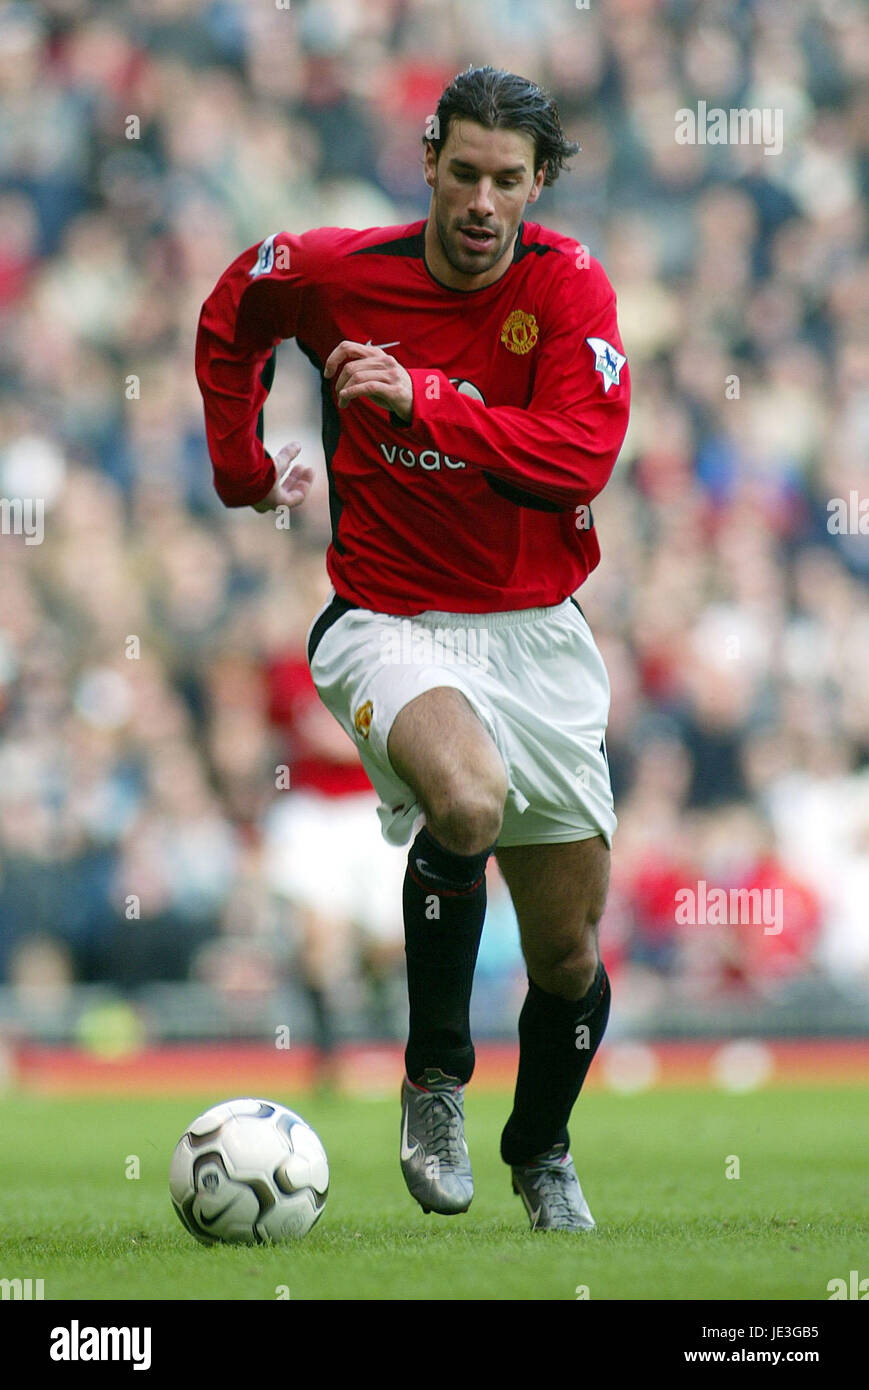 RUUD VAN NISTELROOY MANCHESTER UNITED FC OLD TRAFFORD MANCHESTER ENGLAND 20  November 2004 Stock Photo - Alamy